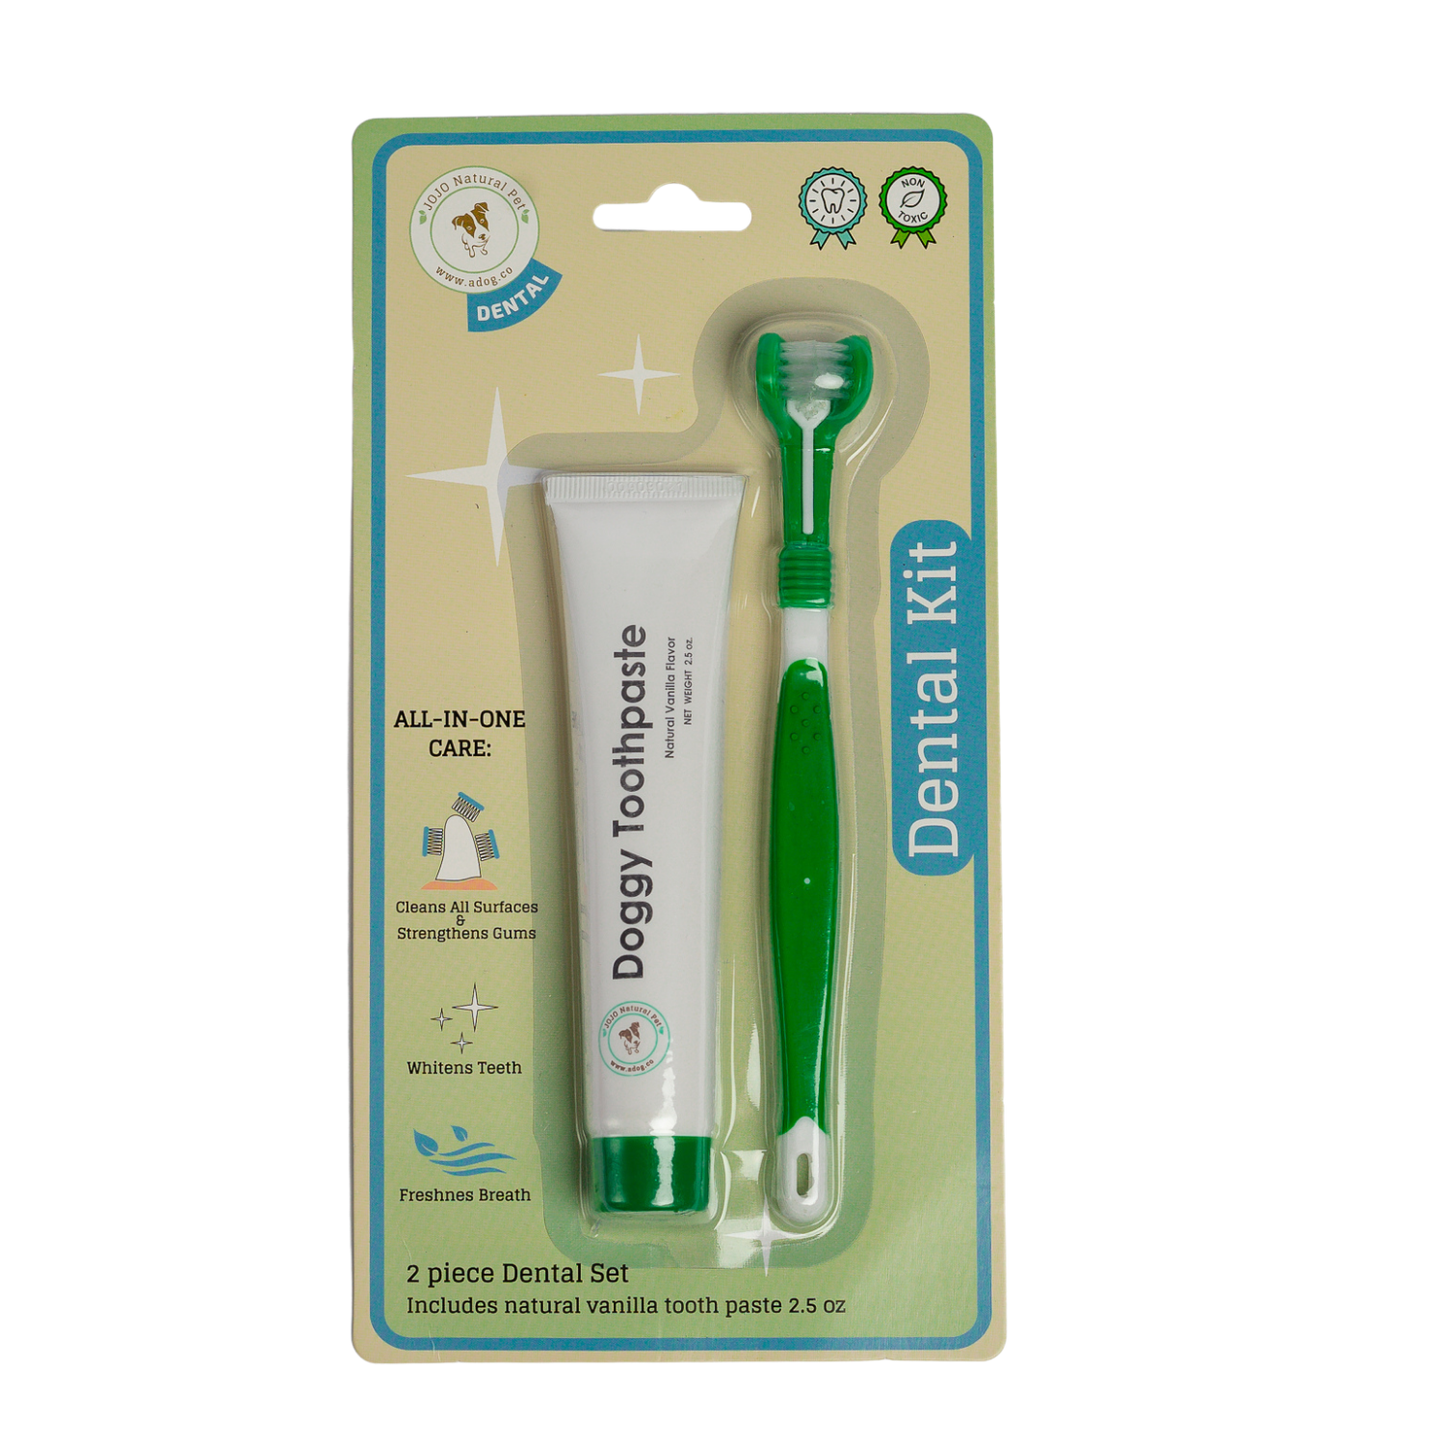 Triple Headed Dog Tooth Brush with Toothpaste-2pc Dental Kit